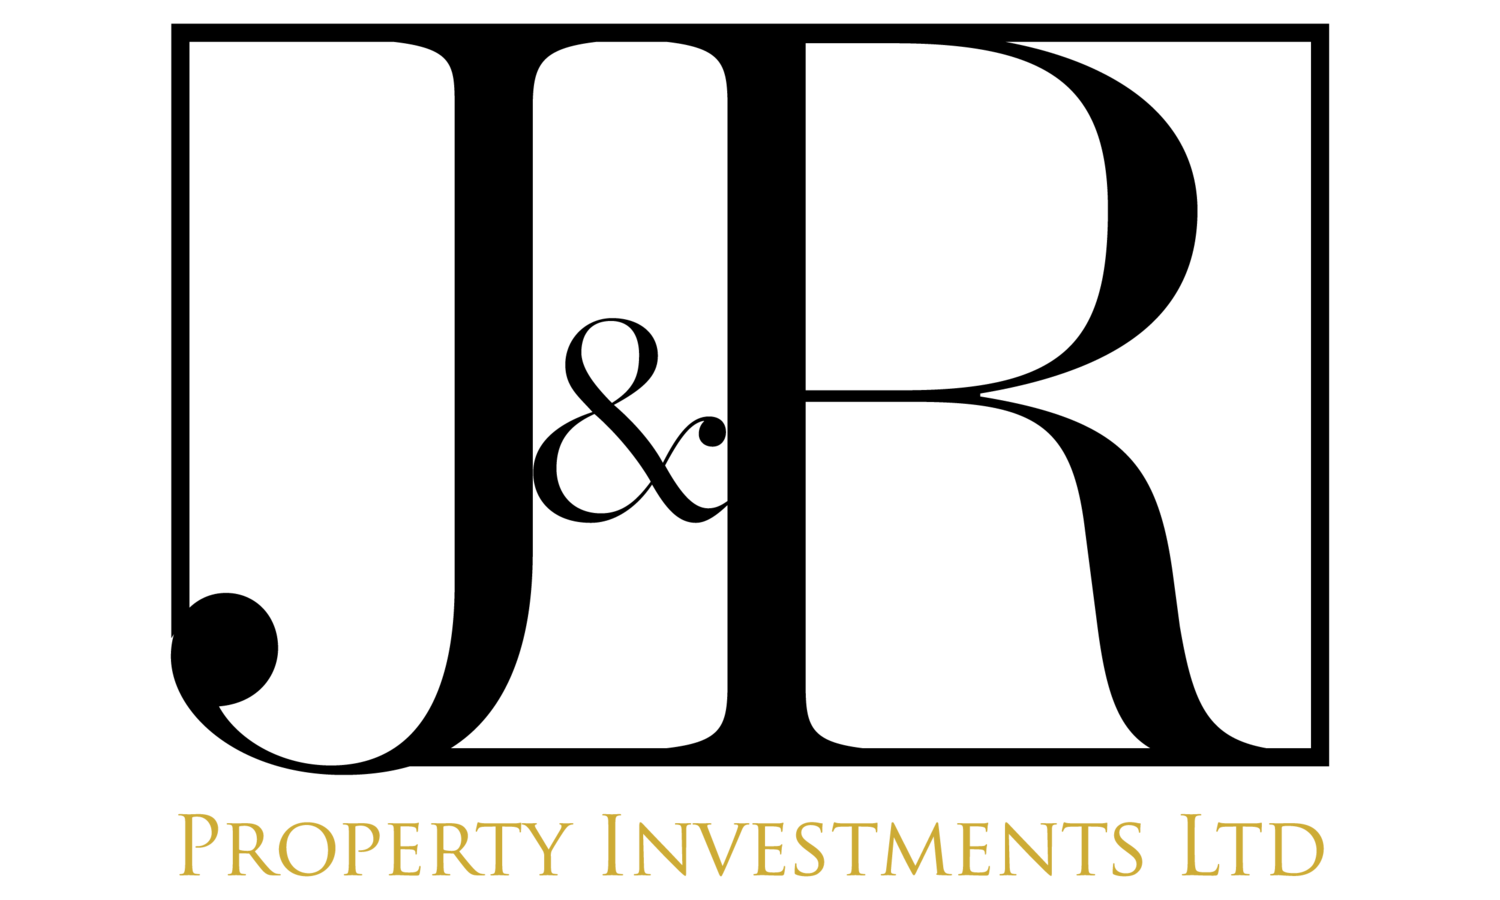 J & R Property Investments